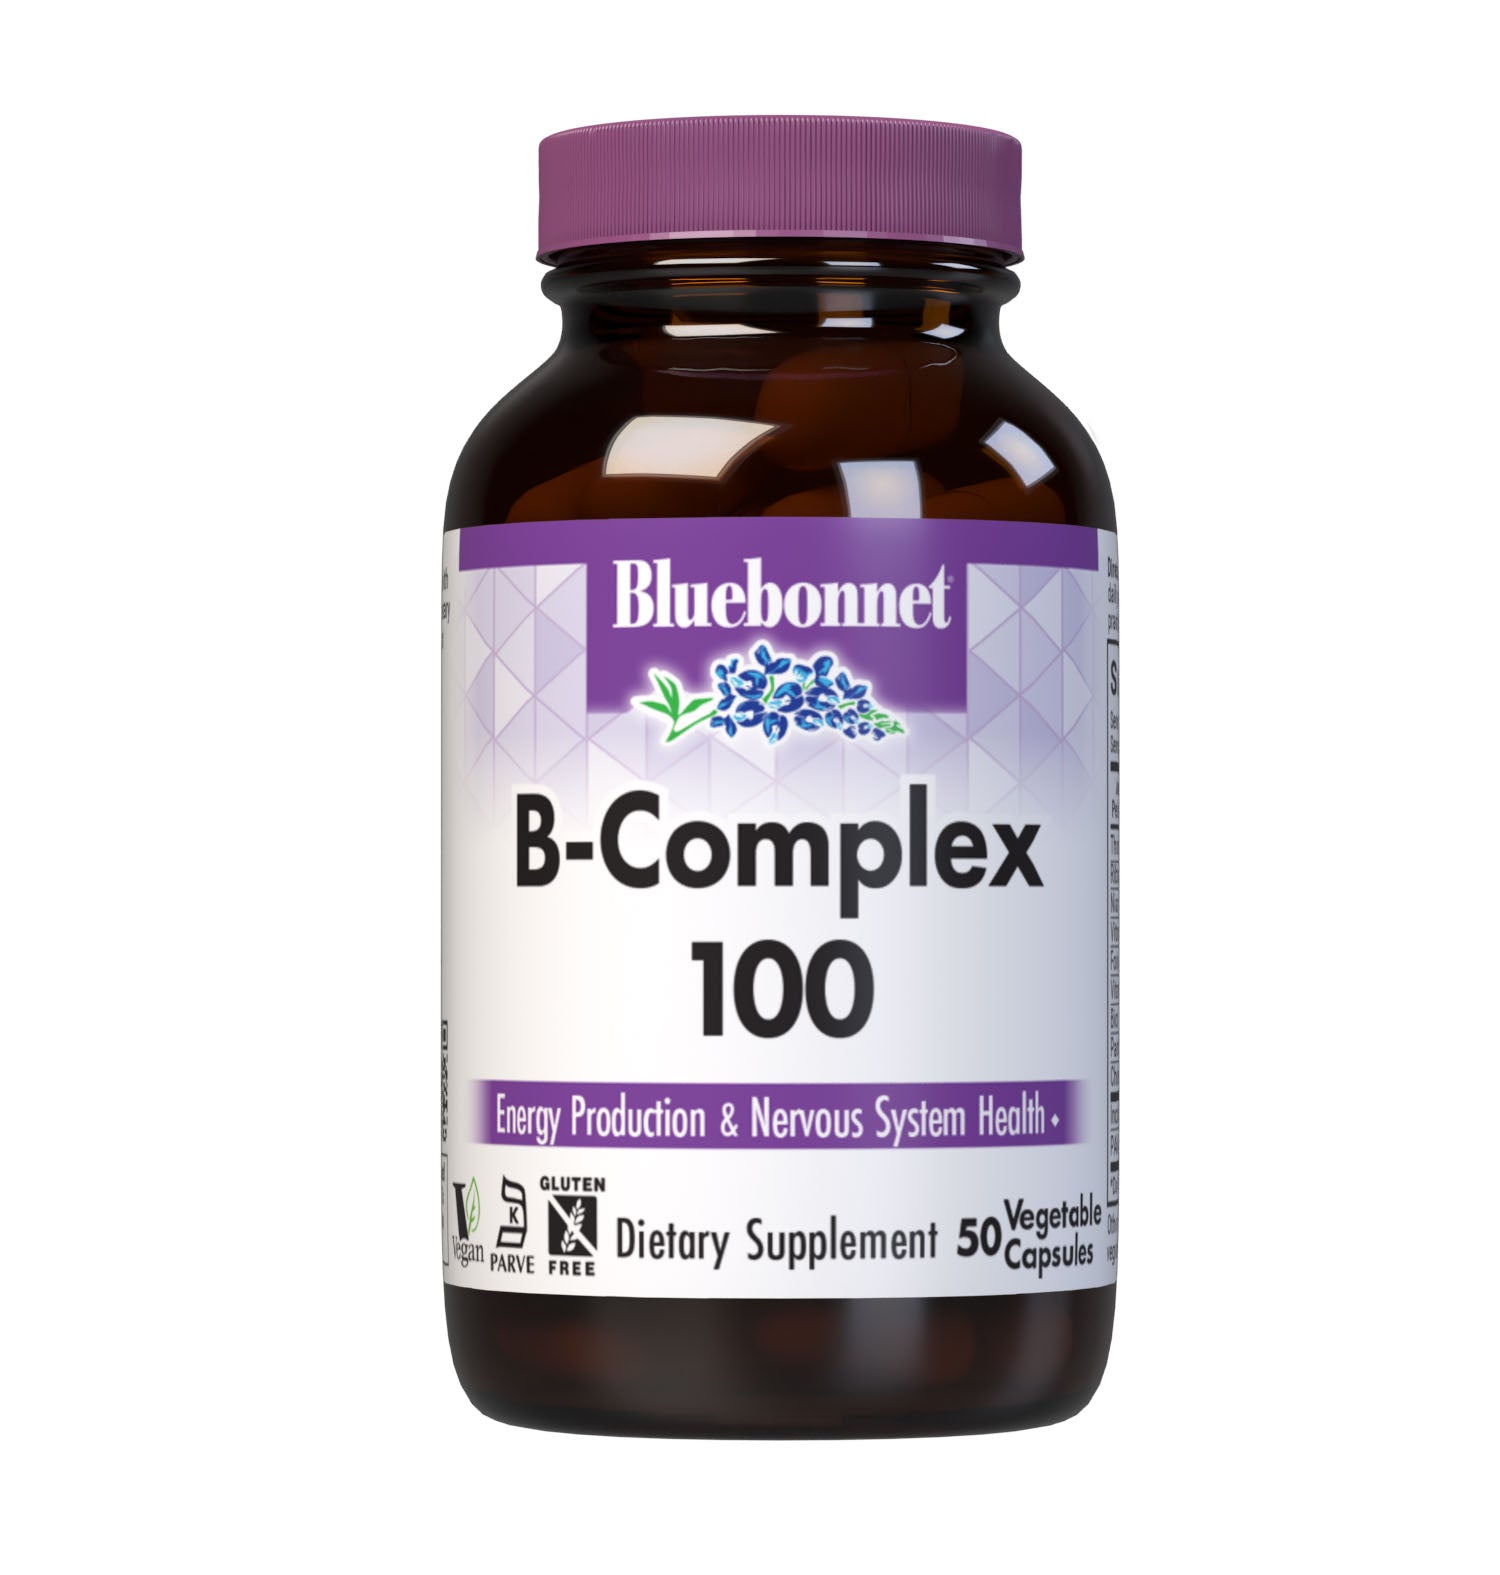 Bluebonnet’s B-Complex 100 Vegetable Capsules are formulated with a full spectrum of high potency B vitamins which play a complementary role in maintaining physiologic and metabolic functions that support energy production and nervous system health. #size_50 count